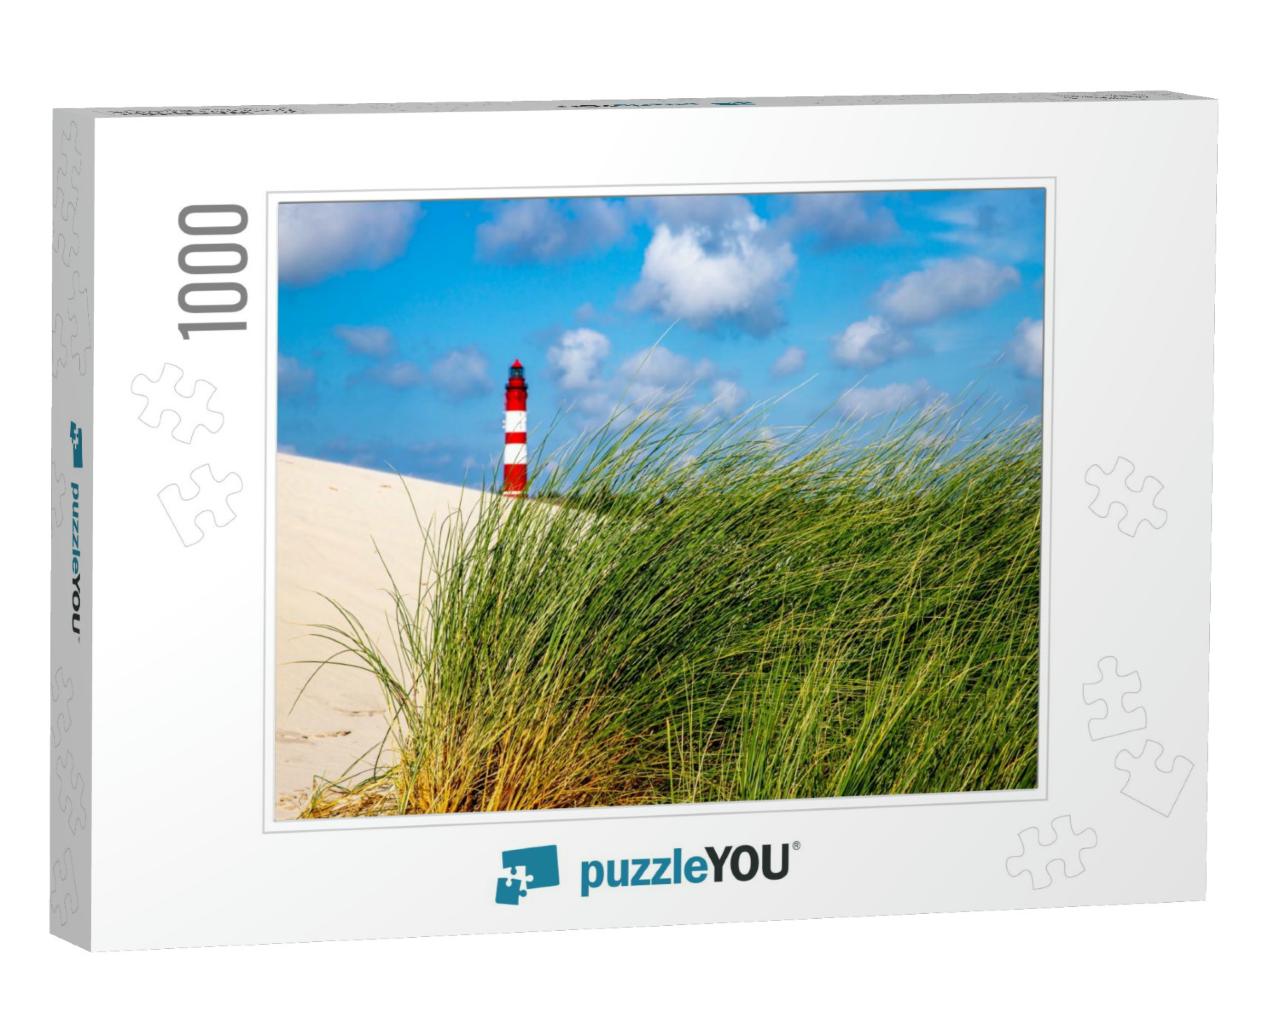 Amrum Lighthouse Behind Dune Grass... Jigsaw Puzzle with 1000 pieces